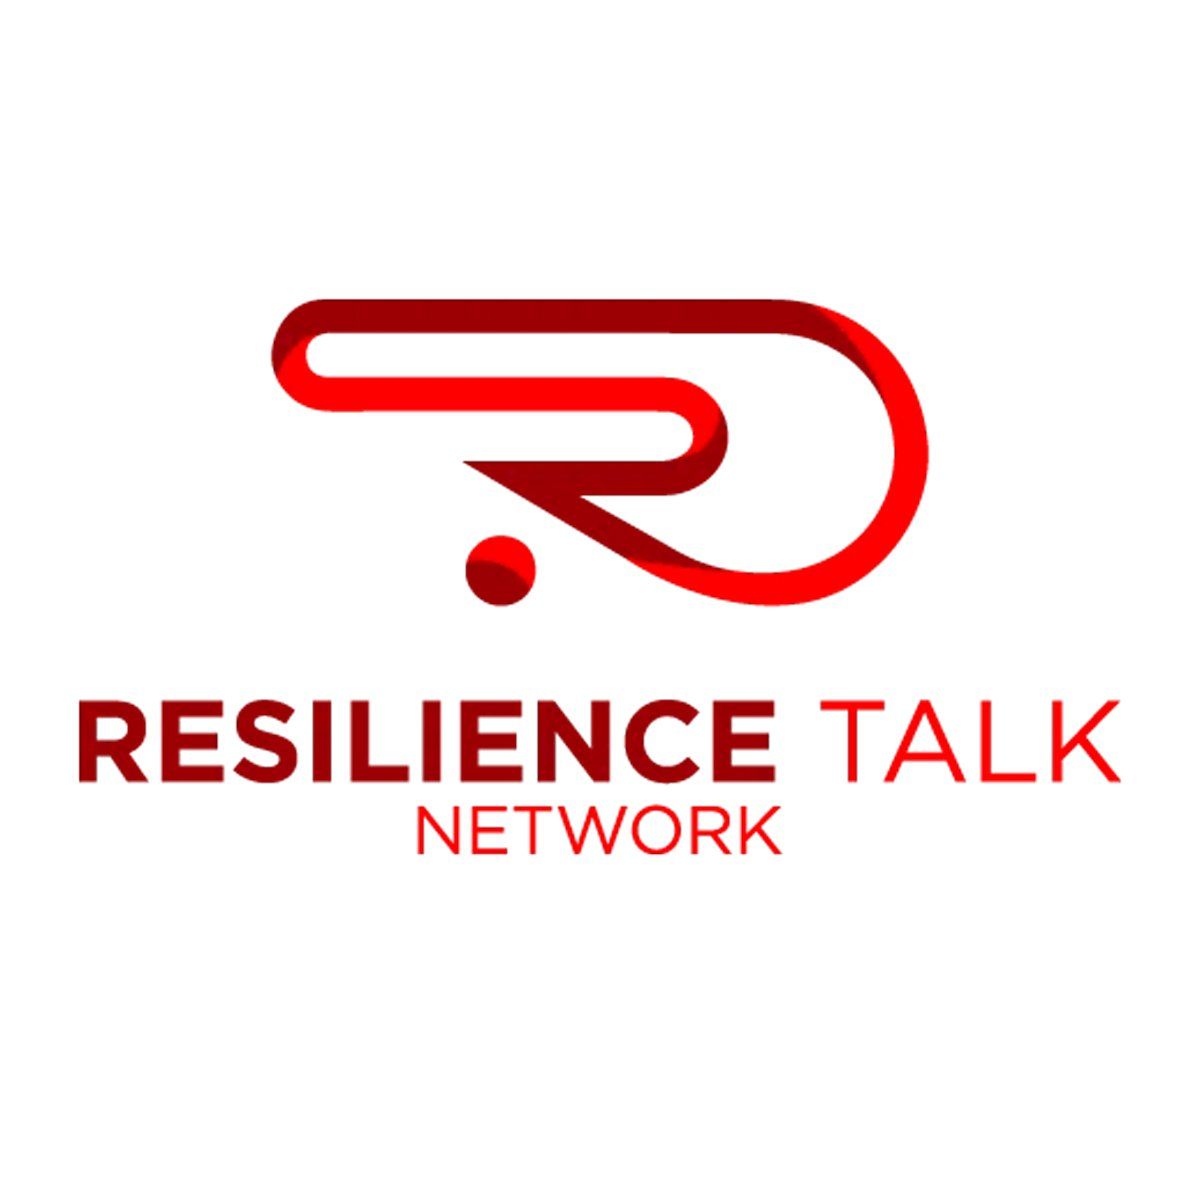 Resilience Talk Network